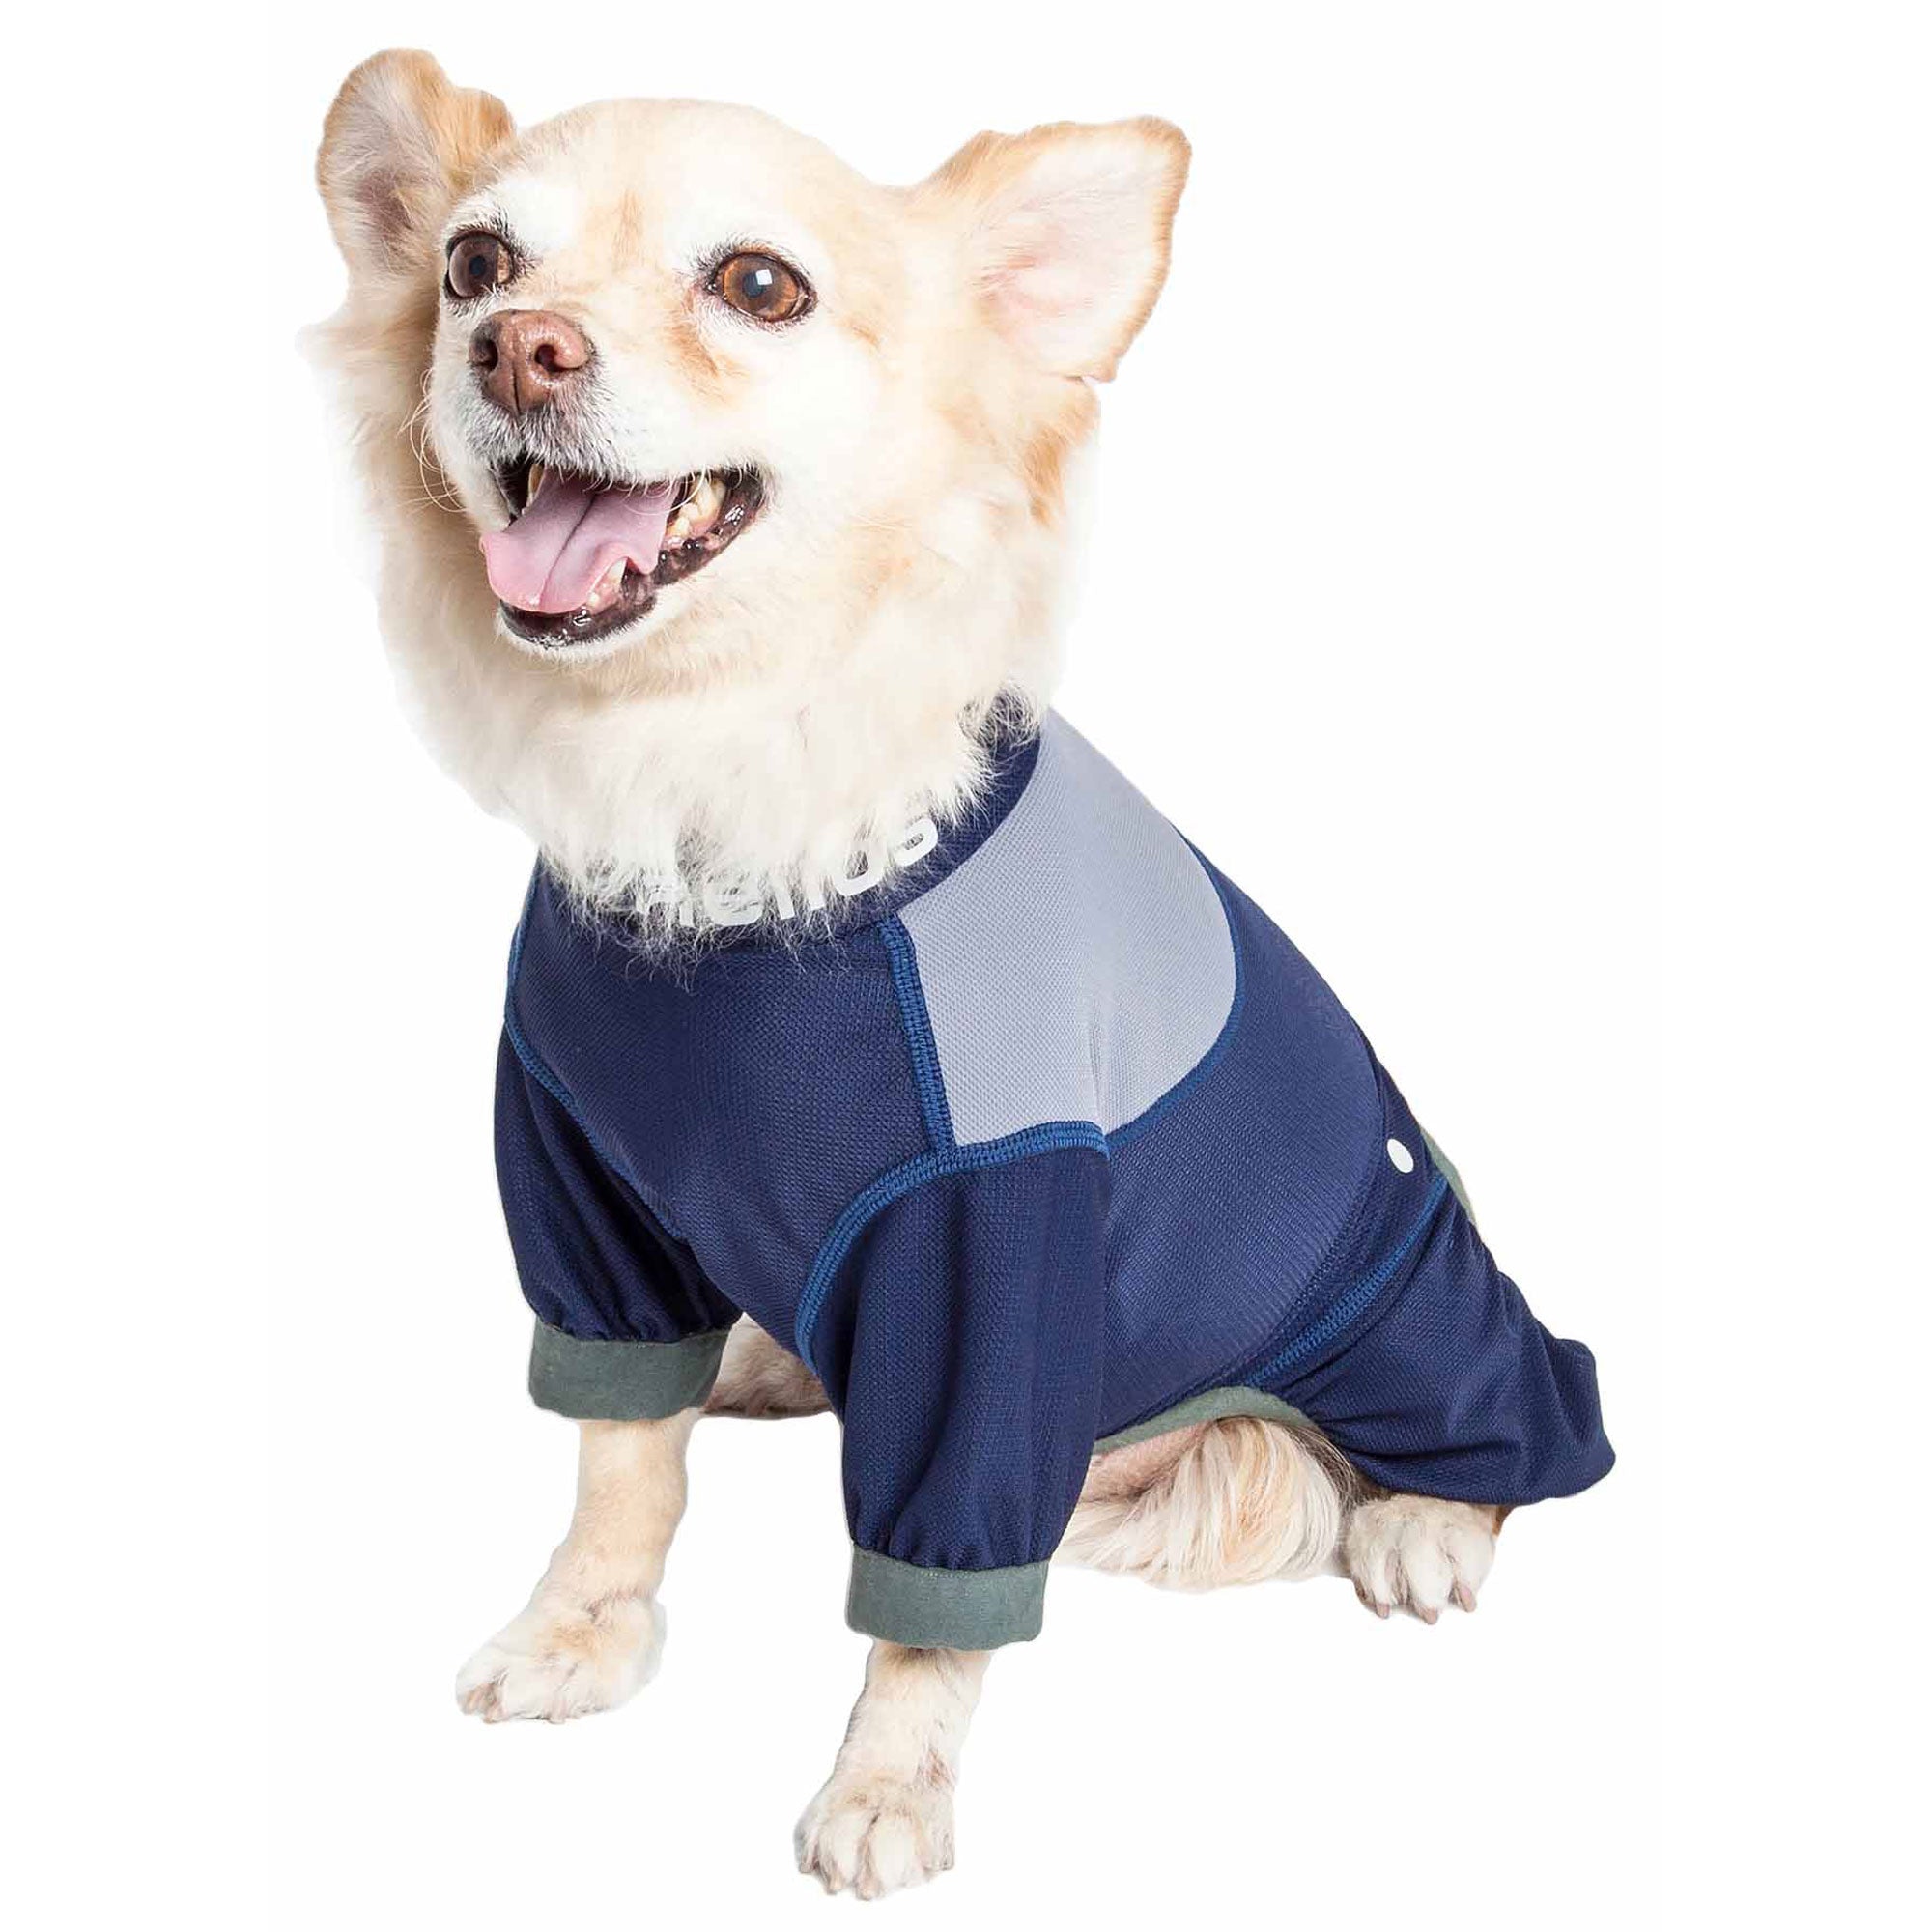 Dog Helios® Tail Runner Dog Track Suit - Blue & Gray - Small